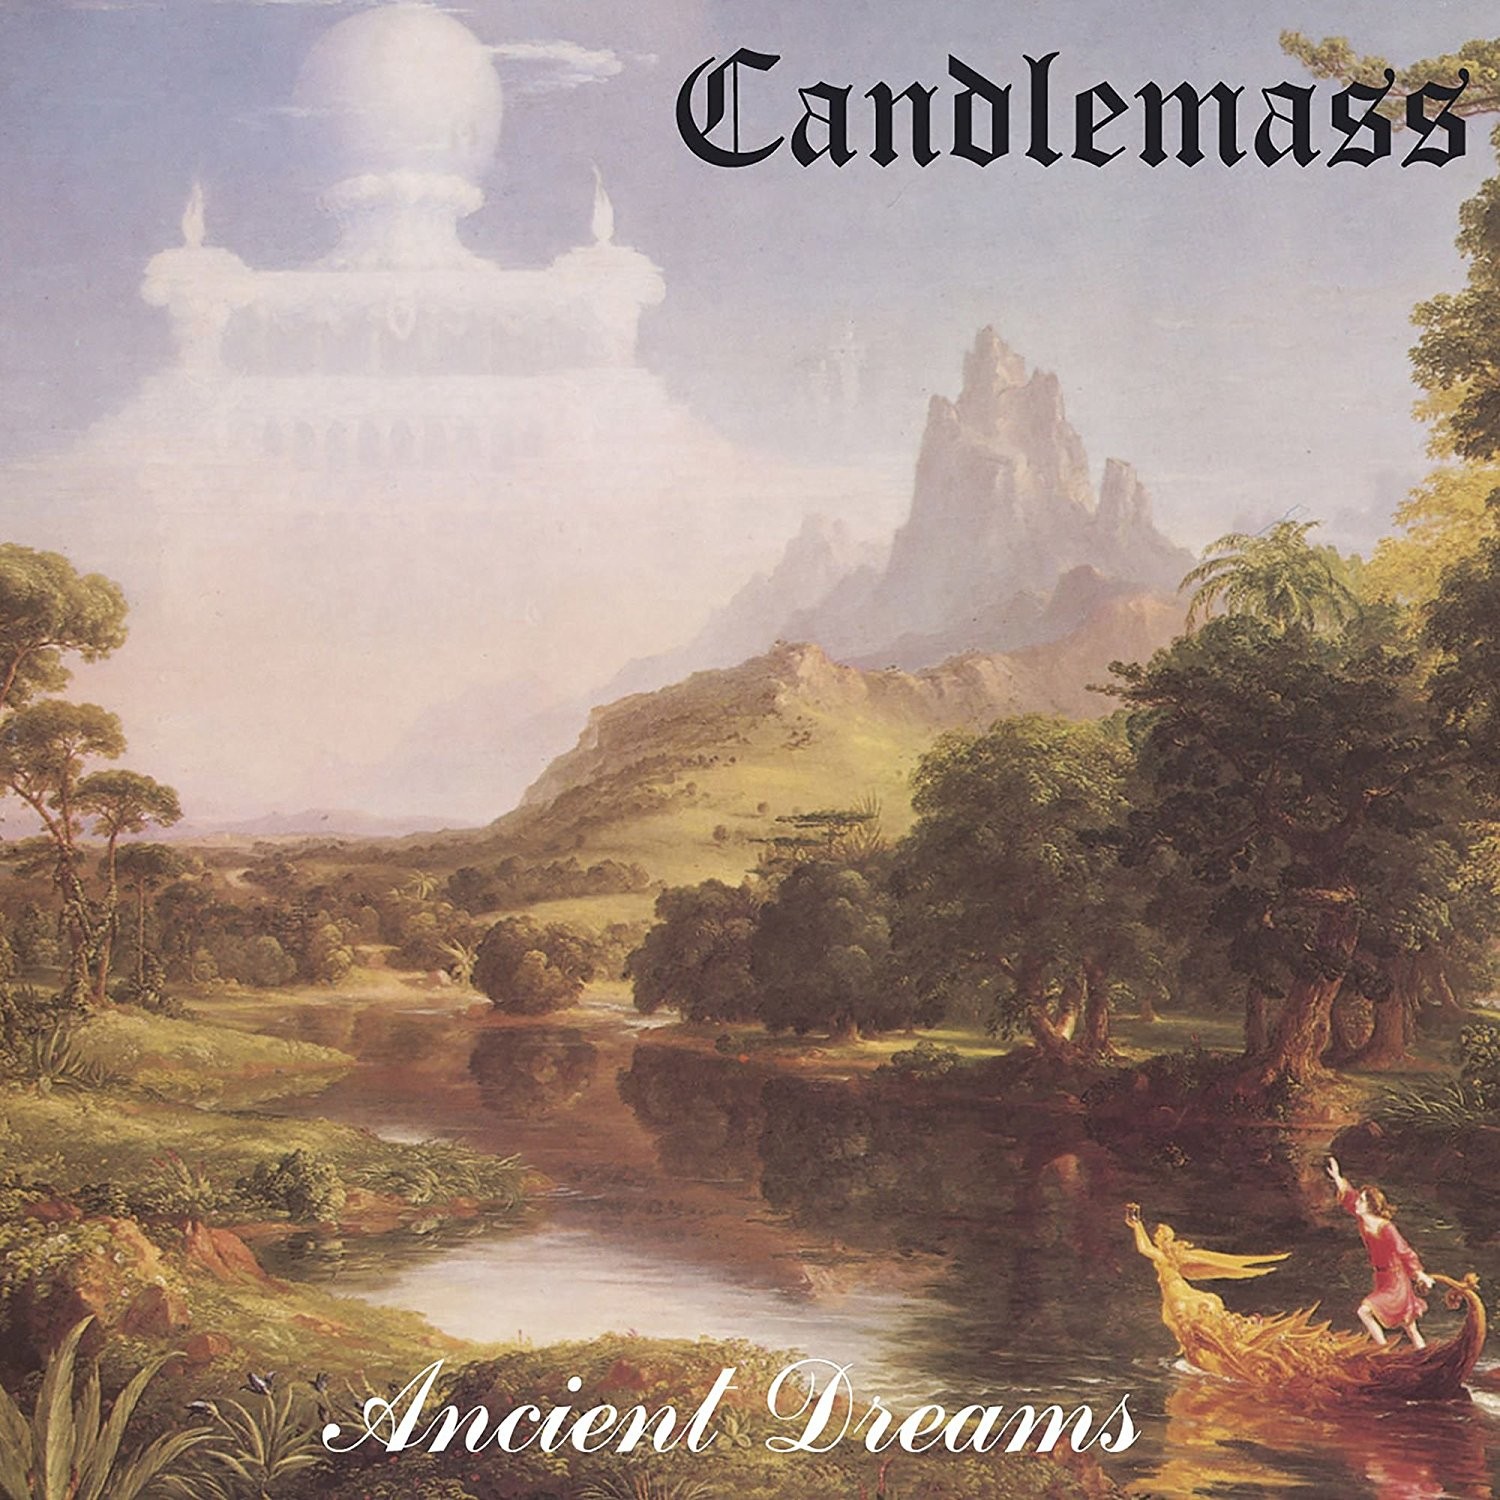 Candlemass - Ancient Dreams